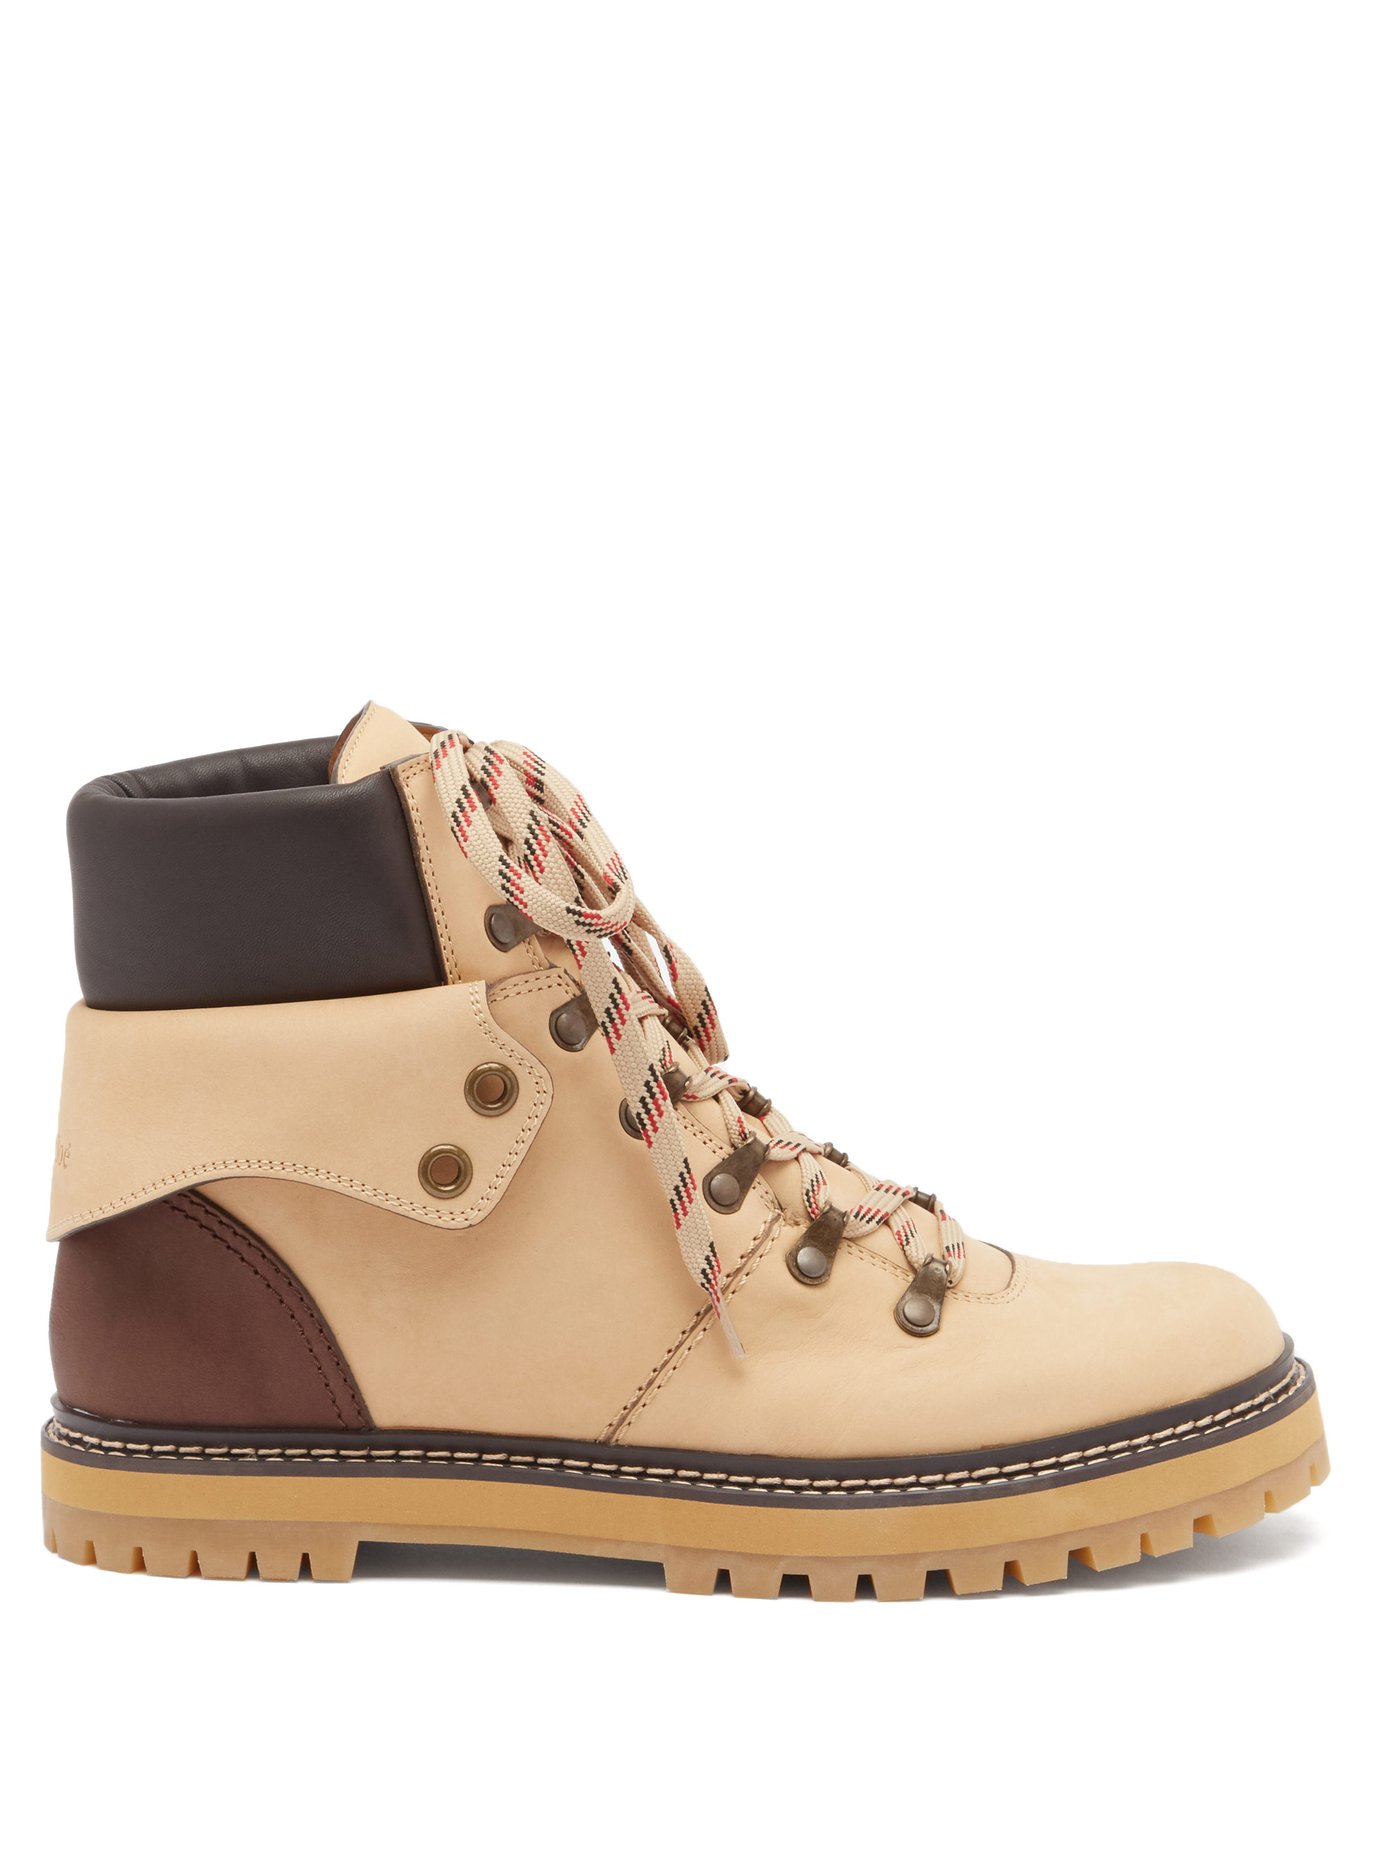 see by chloe hiking boots